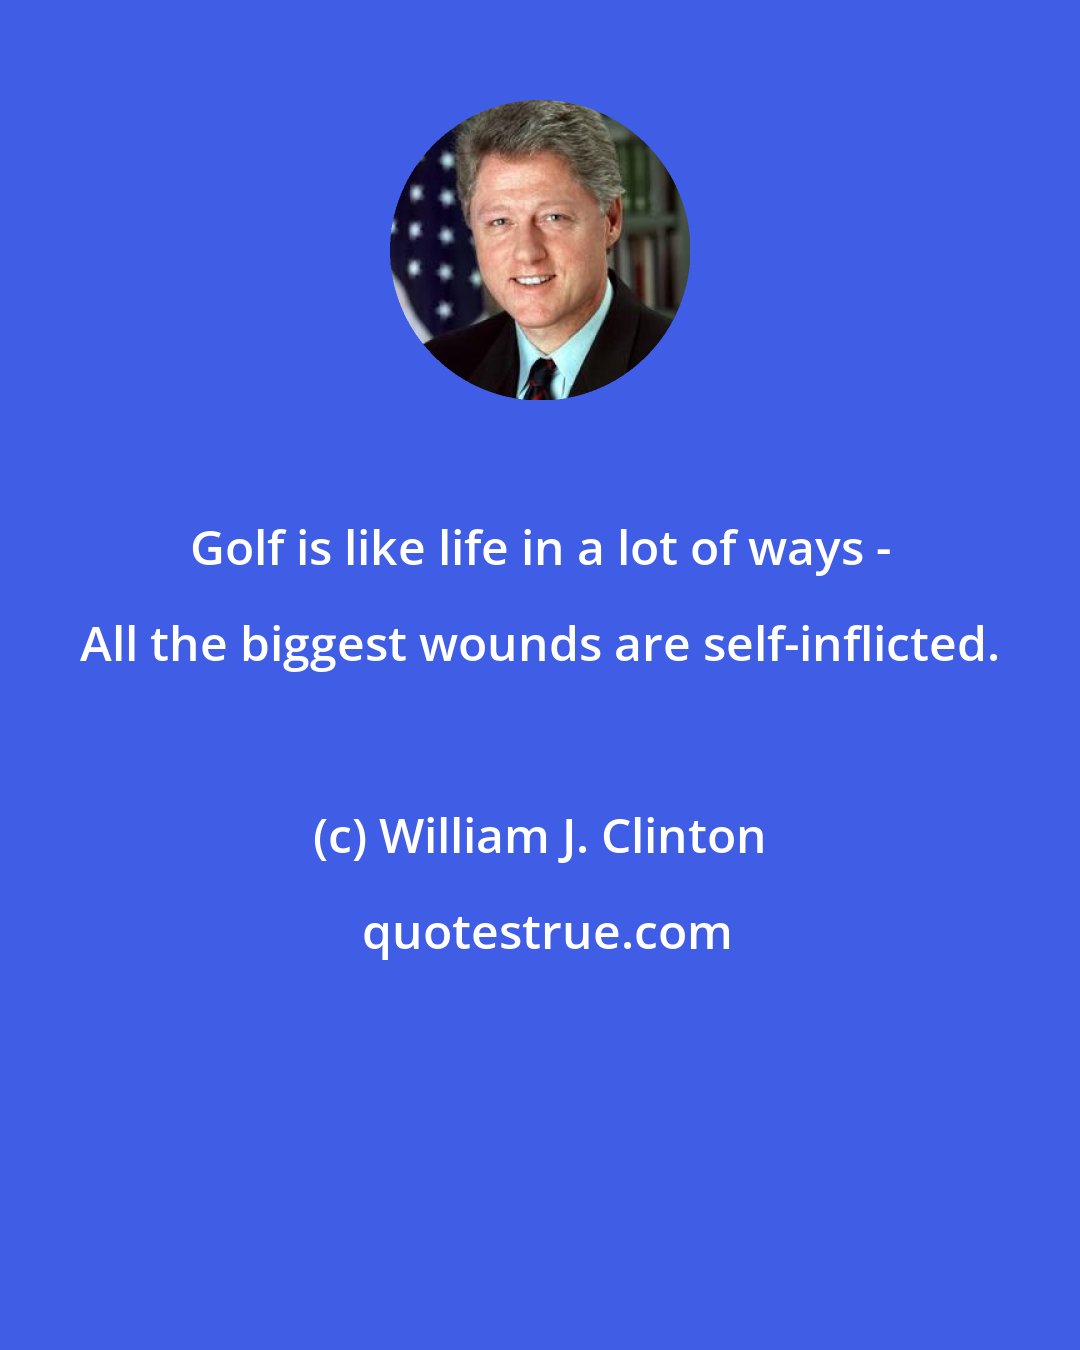 William J. Clinton: Golf is like life in a lot of ways - All the biggest wounds are self-inflicted.